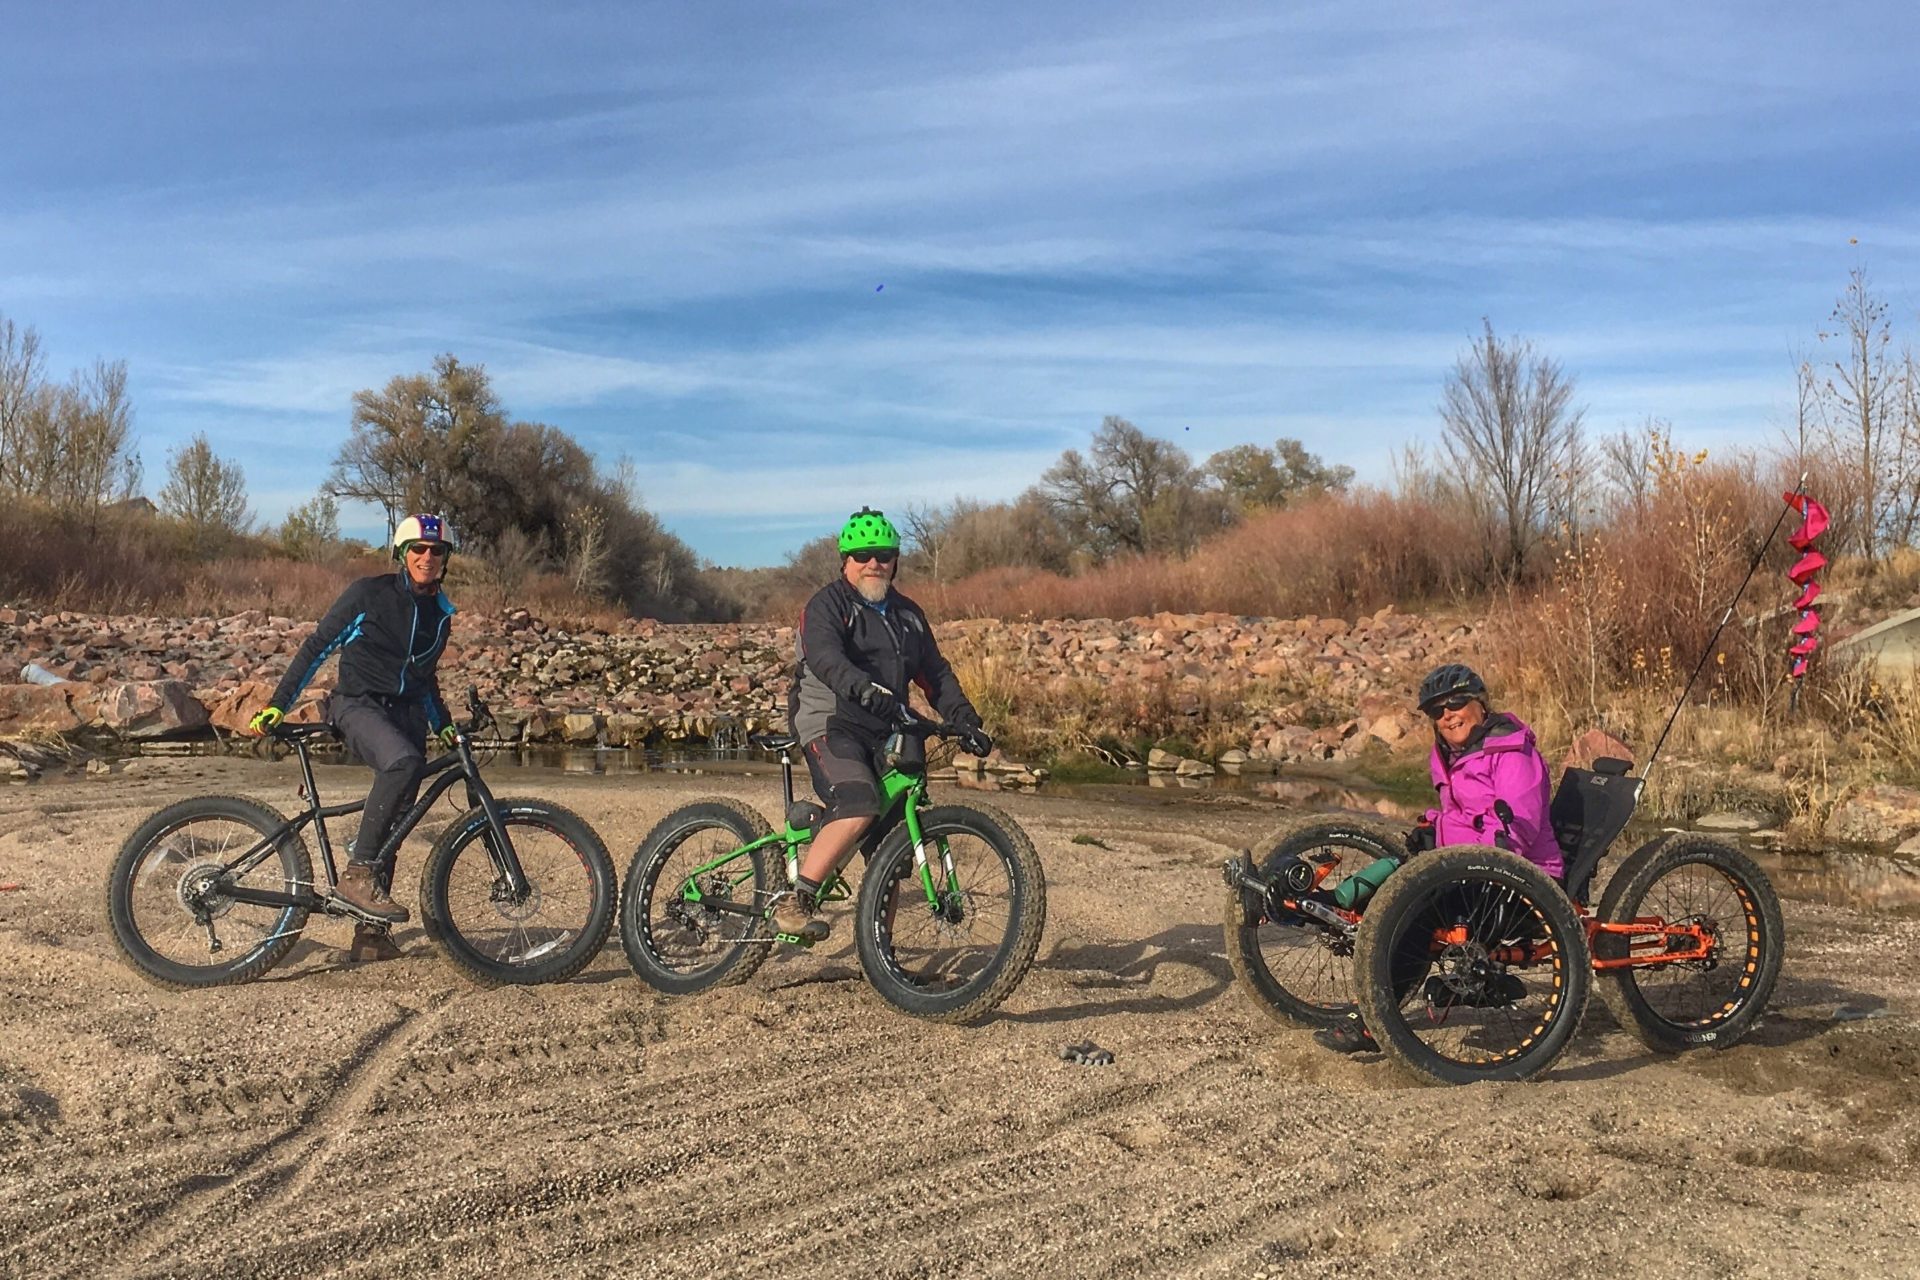 Three people pose for the camera with their bikes standing on a dirt patch. The person on the right is sitting in an off-road trike.